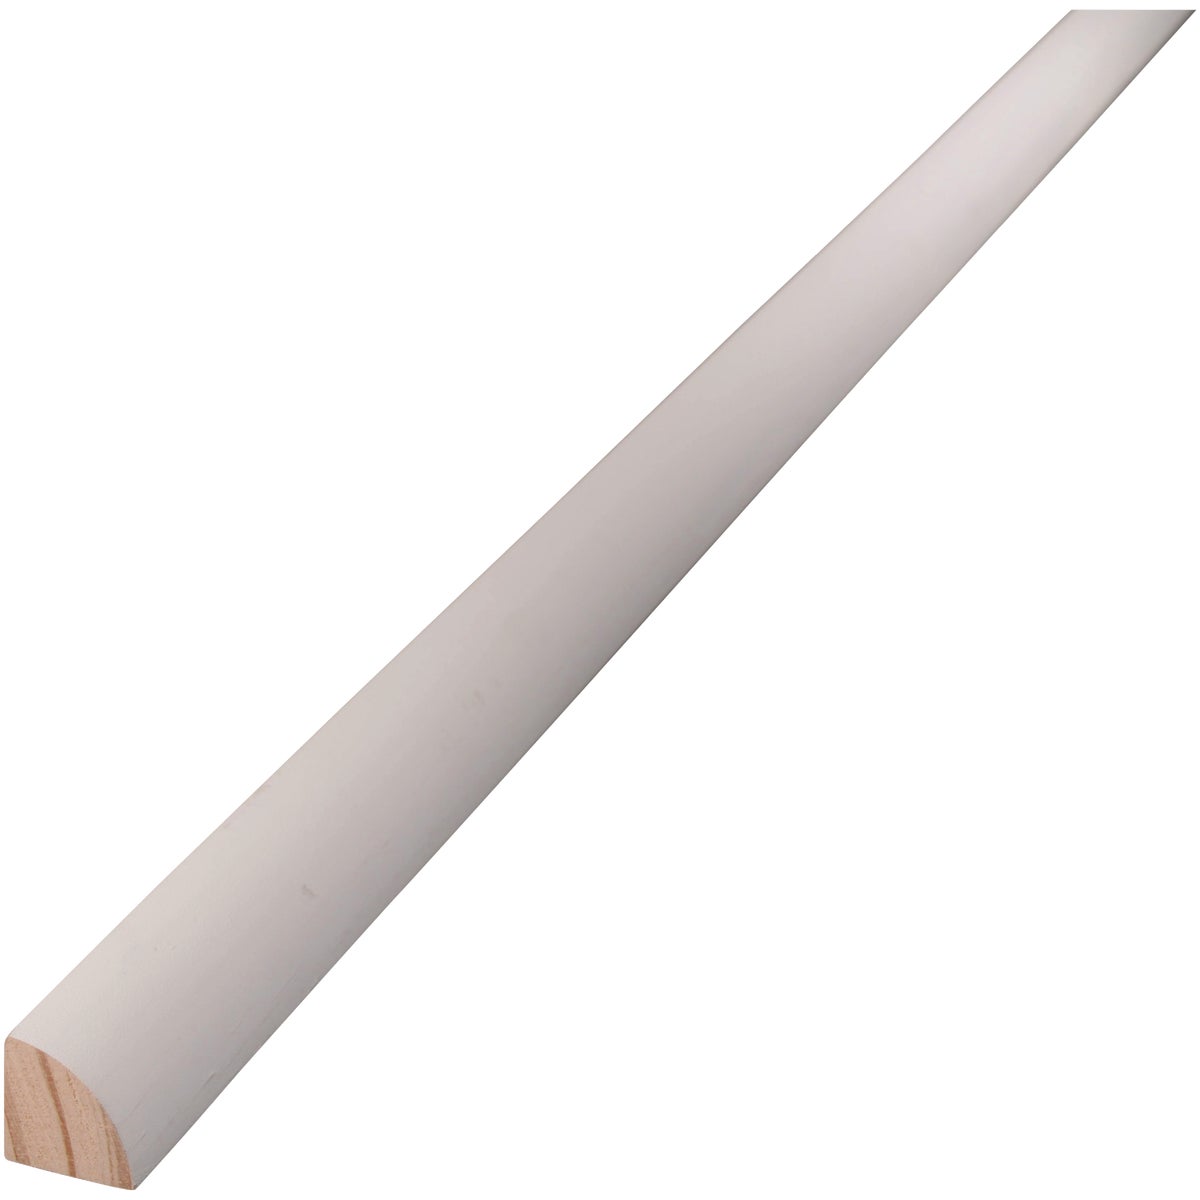 Alexandria Moulding 3/4 In. W. x 3/4 In. H. x 8 Ft. L. White Finger Joint Pine Quarter Round Molding